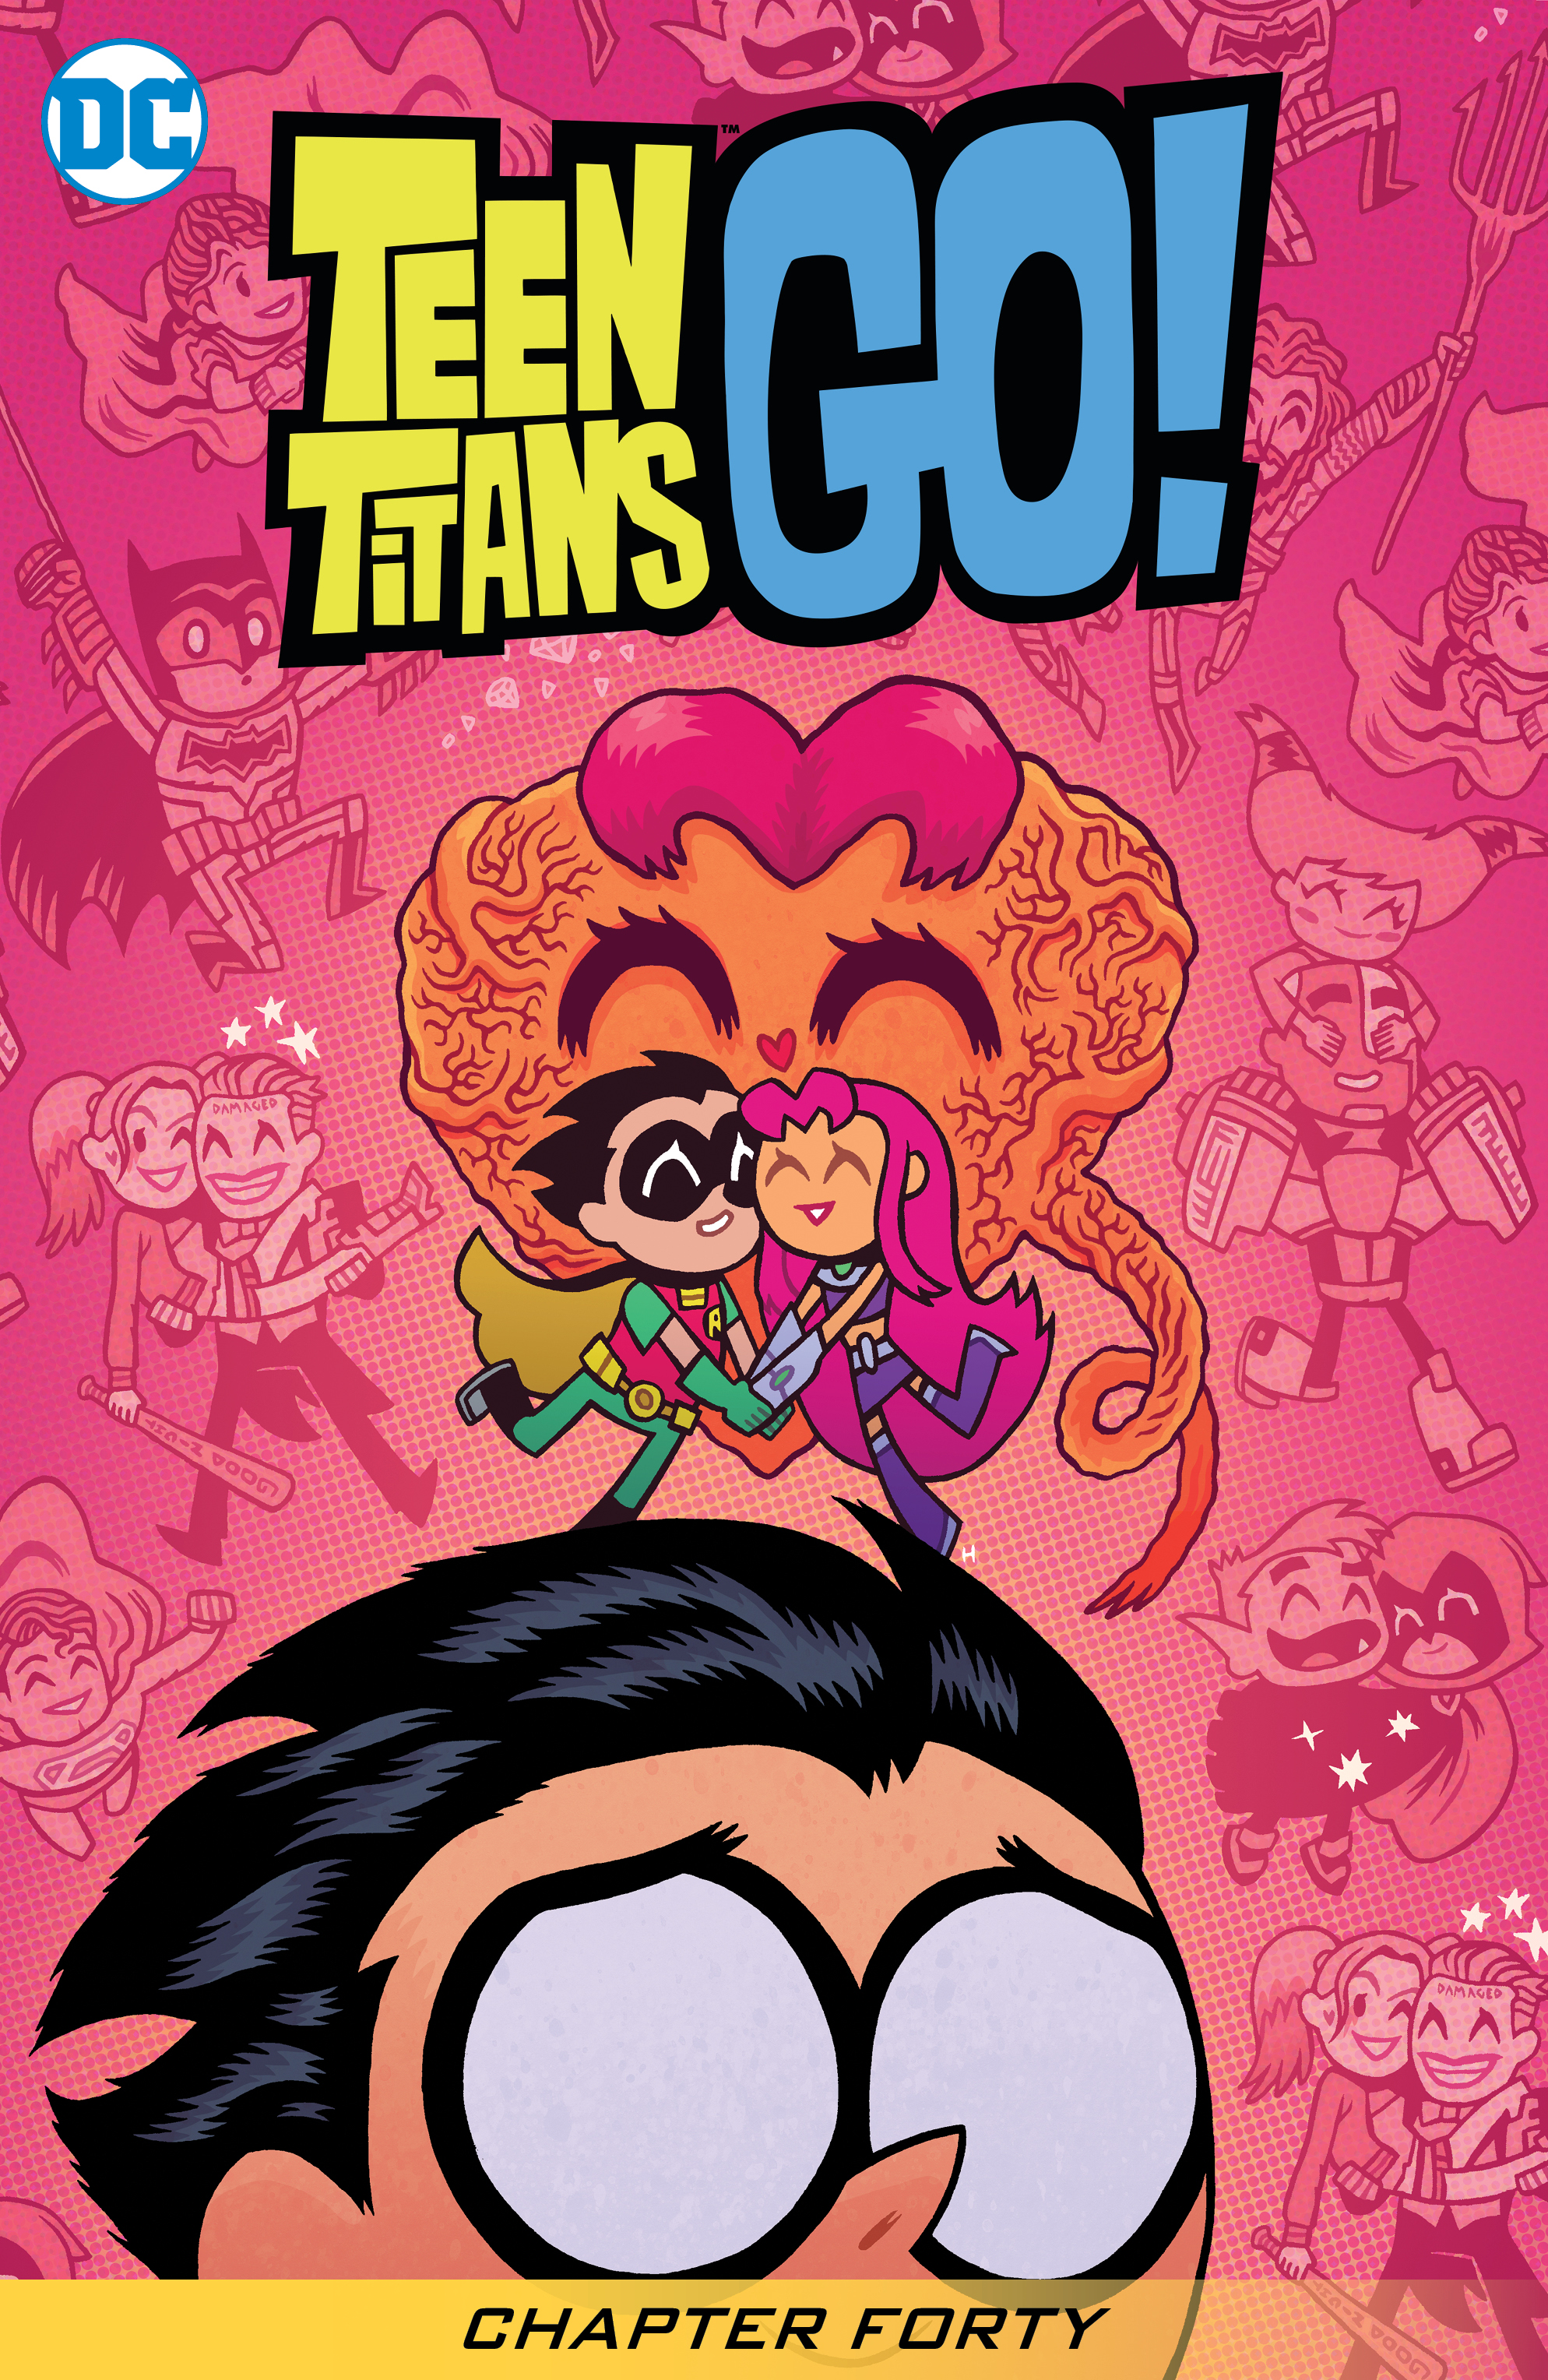 Teen Titans Go! (2013-) #40 preview images